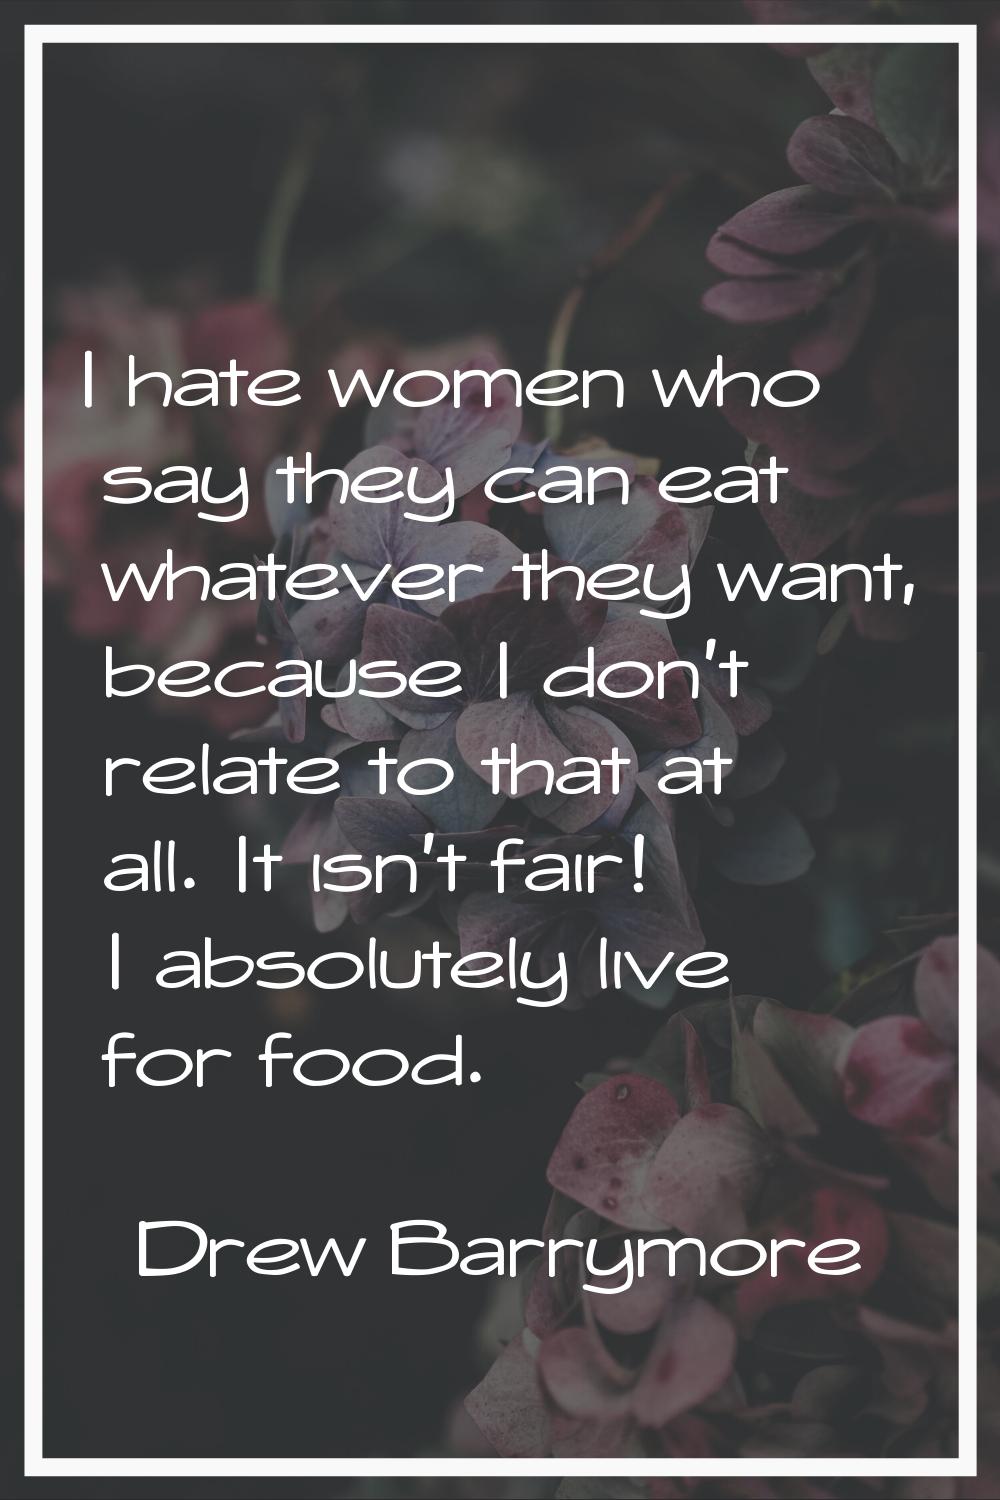 I hate women who say they can eat whatever they want, because I don't relate to that at all. It isn